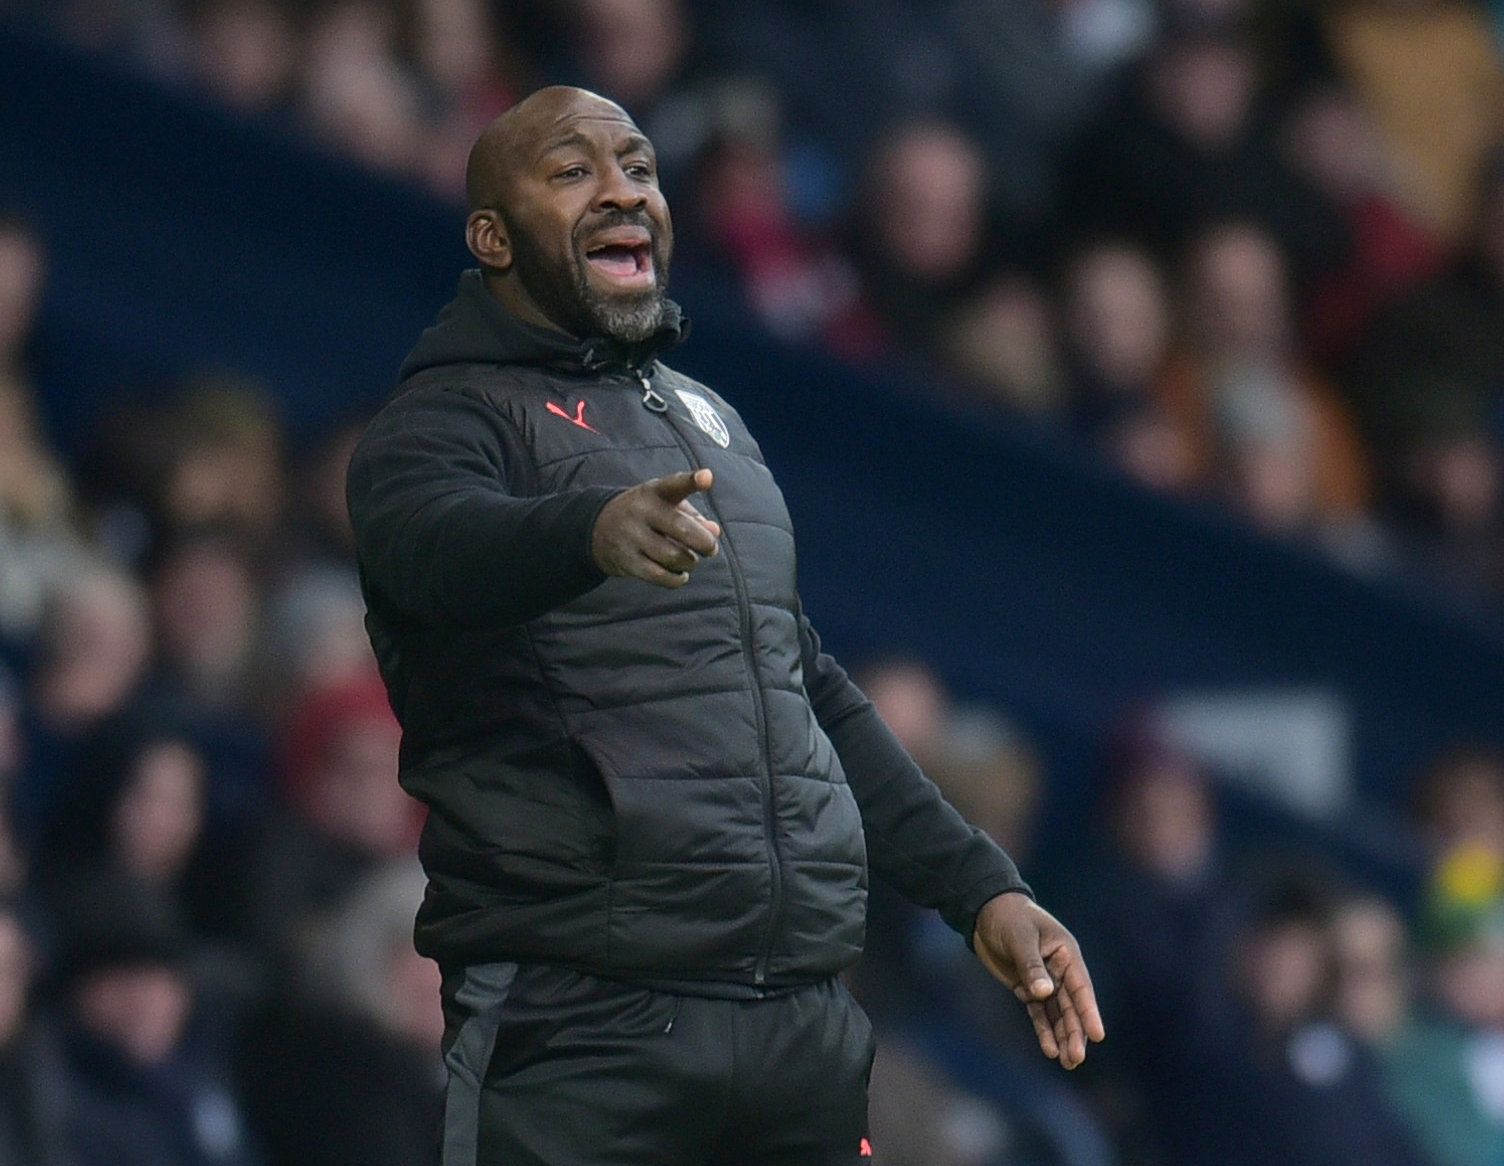 Soccer Football - Championship - West Bromwich Albion v Middlesbrough - The Hawthorns, West Bromwich, Britain - February 2, 2019   West Brom manager Darren Moore   Action Images/Paul Burrows    EDITORIAL USE ONLY. No use with unauthorized audio, video, data, fixture lists, club/league logos or 